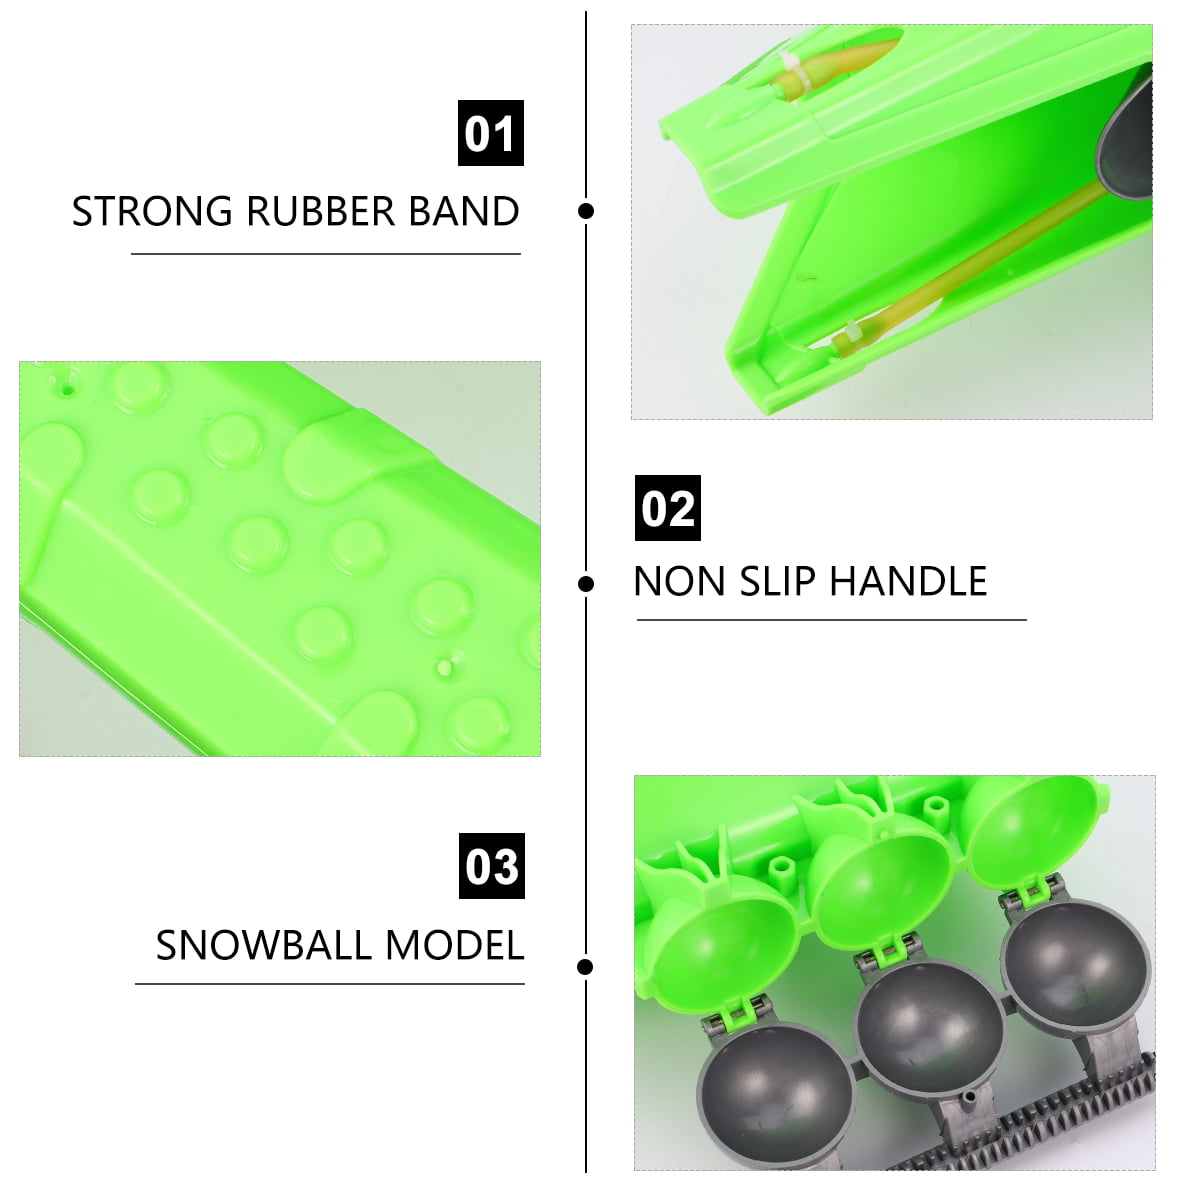 $8 and who knows how much plastic for “Indoor Snowball Fight” :( :  r/Anticonsumption